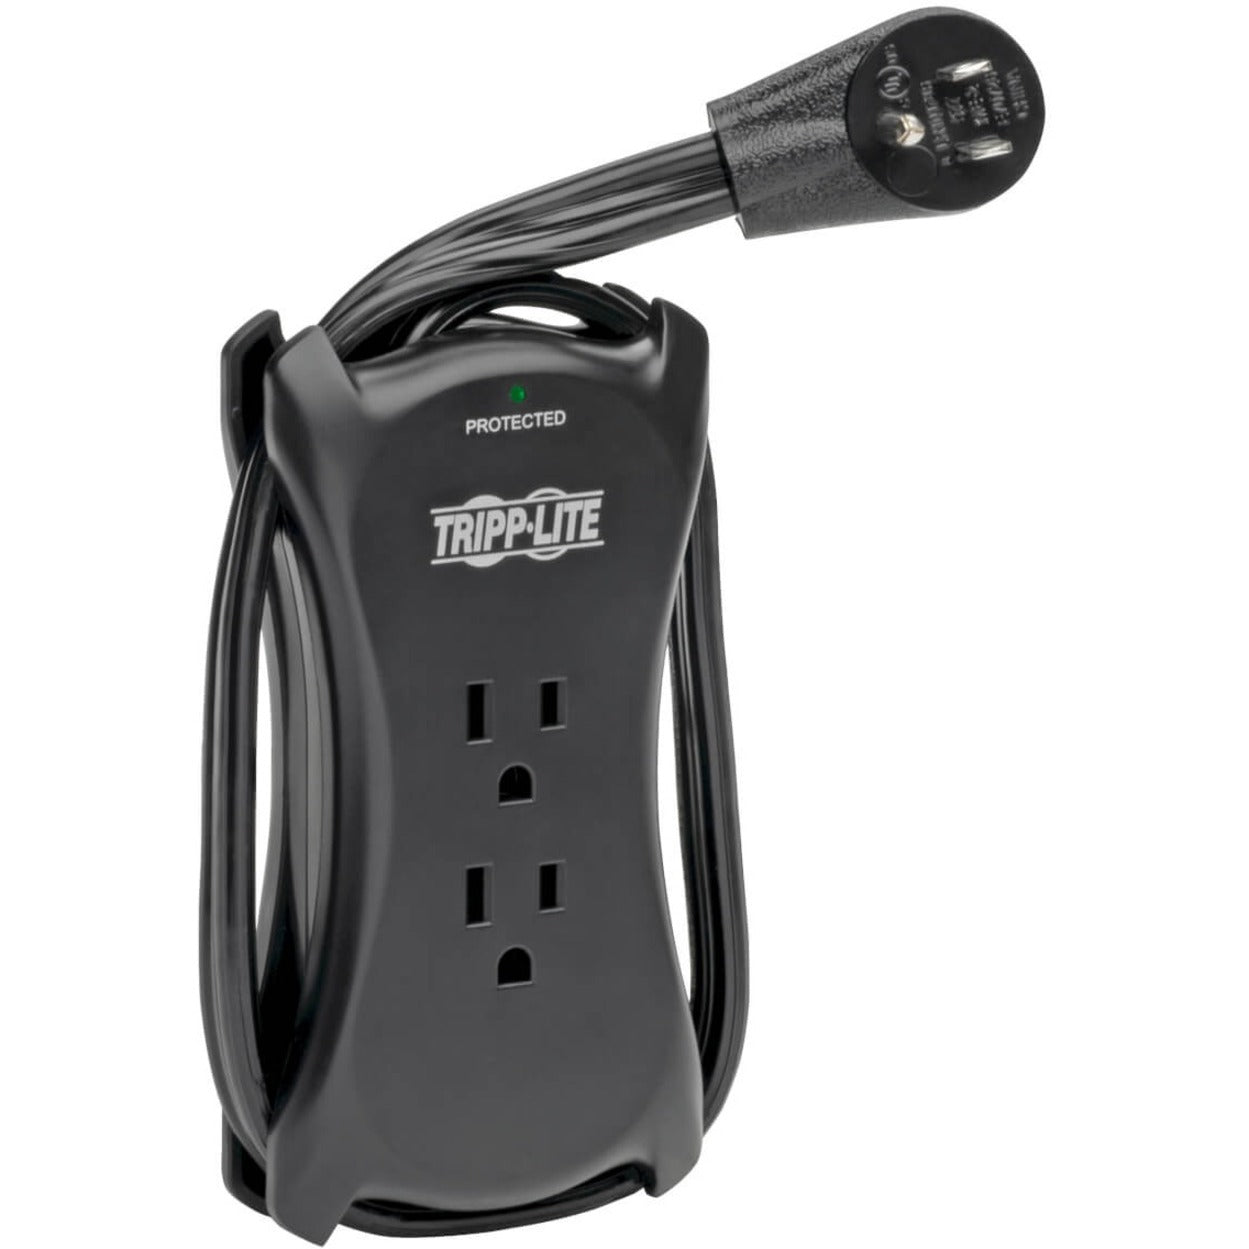 Tripp Lite TRAVELER3USB Protect It! 3-Outlet 2 USB Surge Protector, Compact and Portable Power Strip